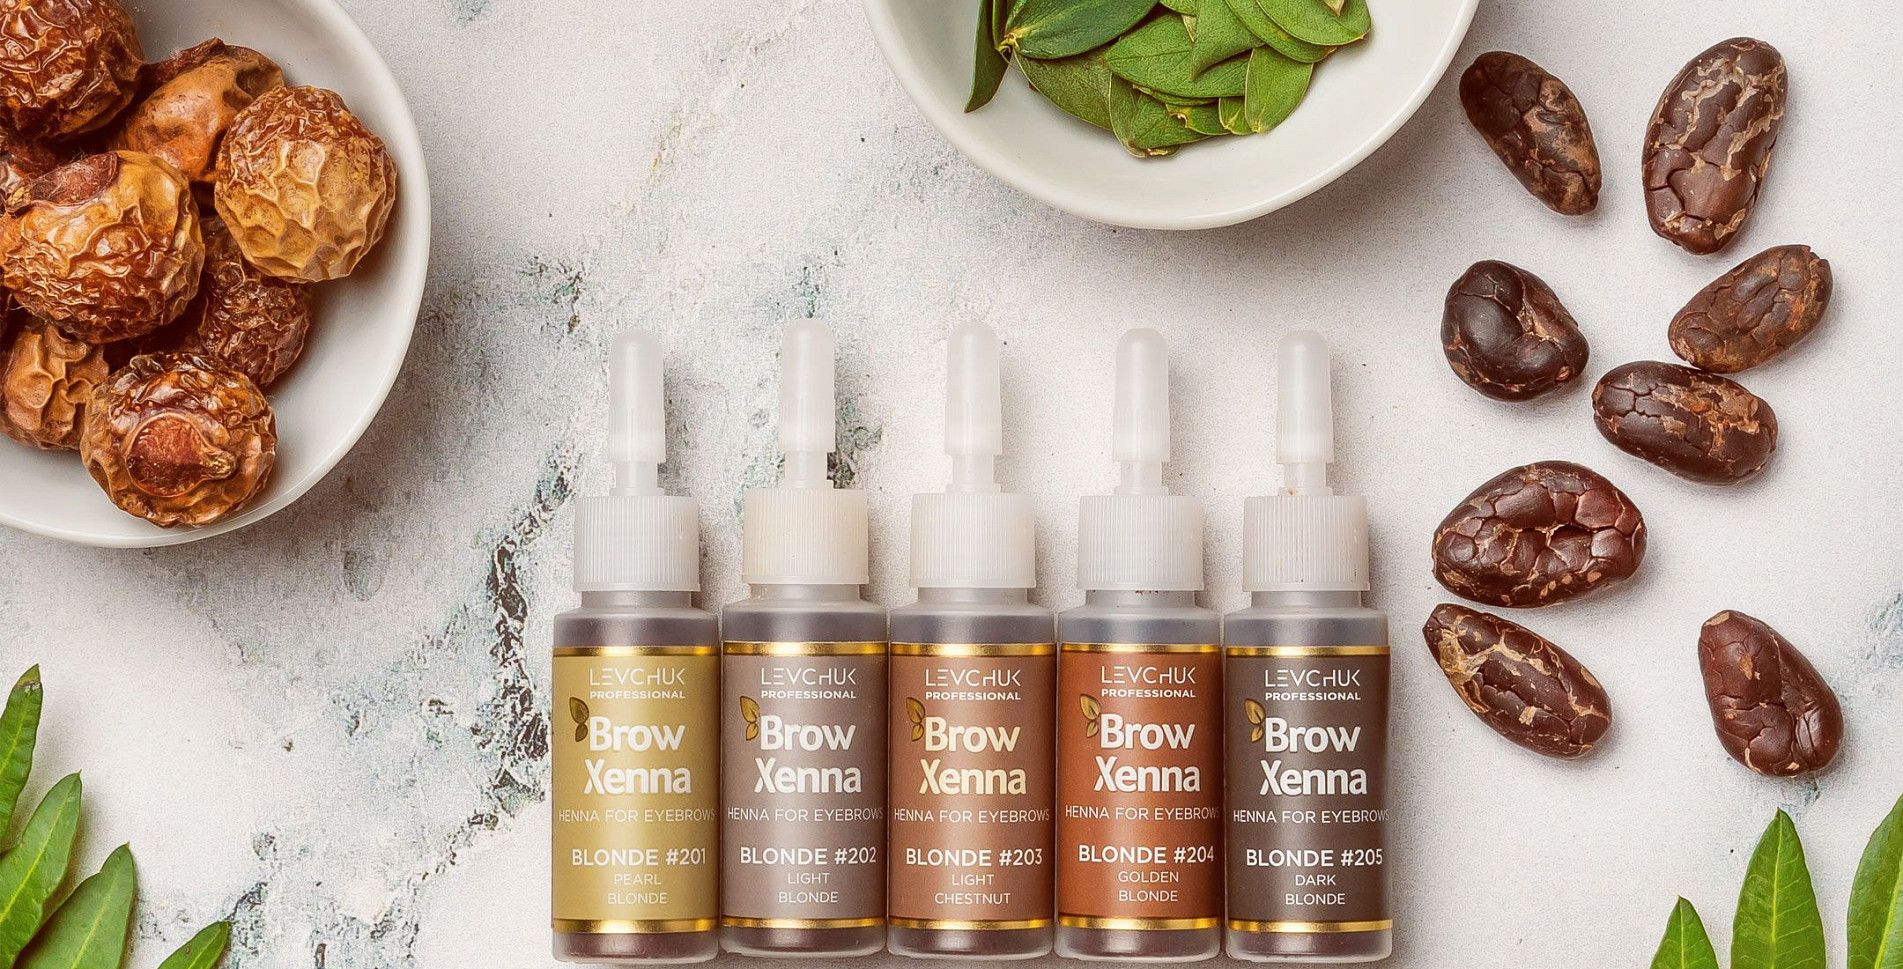 BrowXenna® - a brand that combines caring for nature, experience 